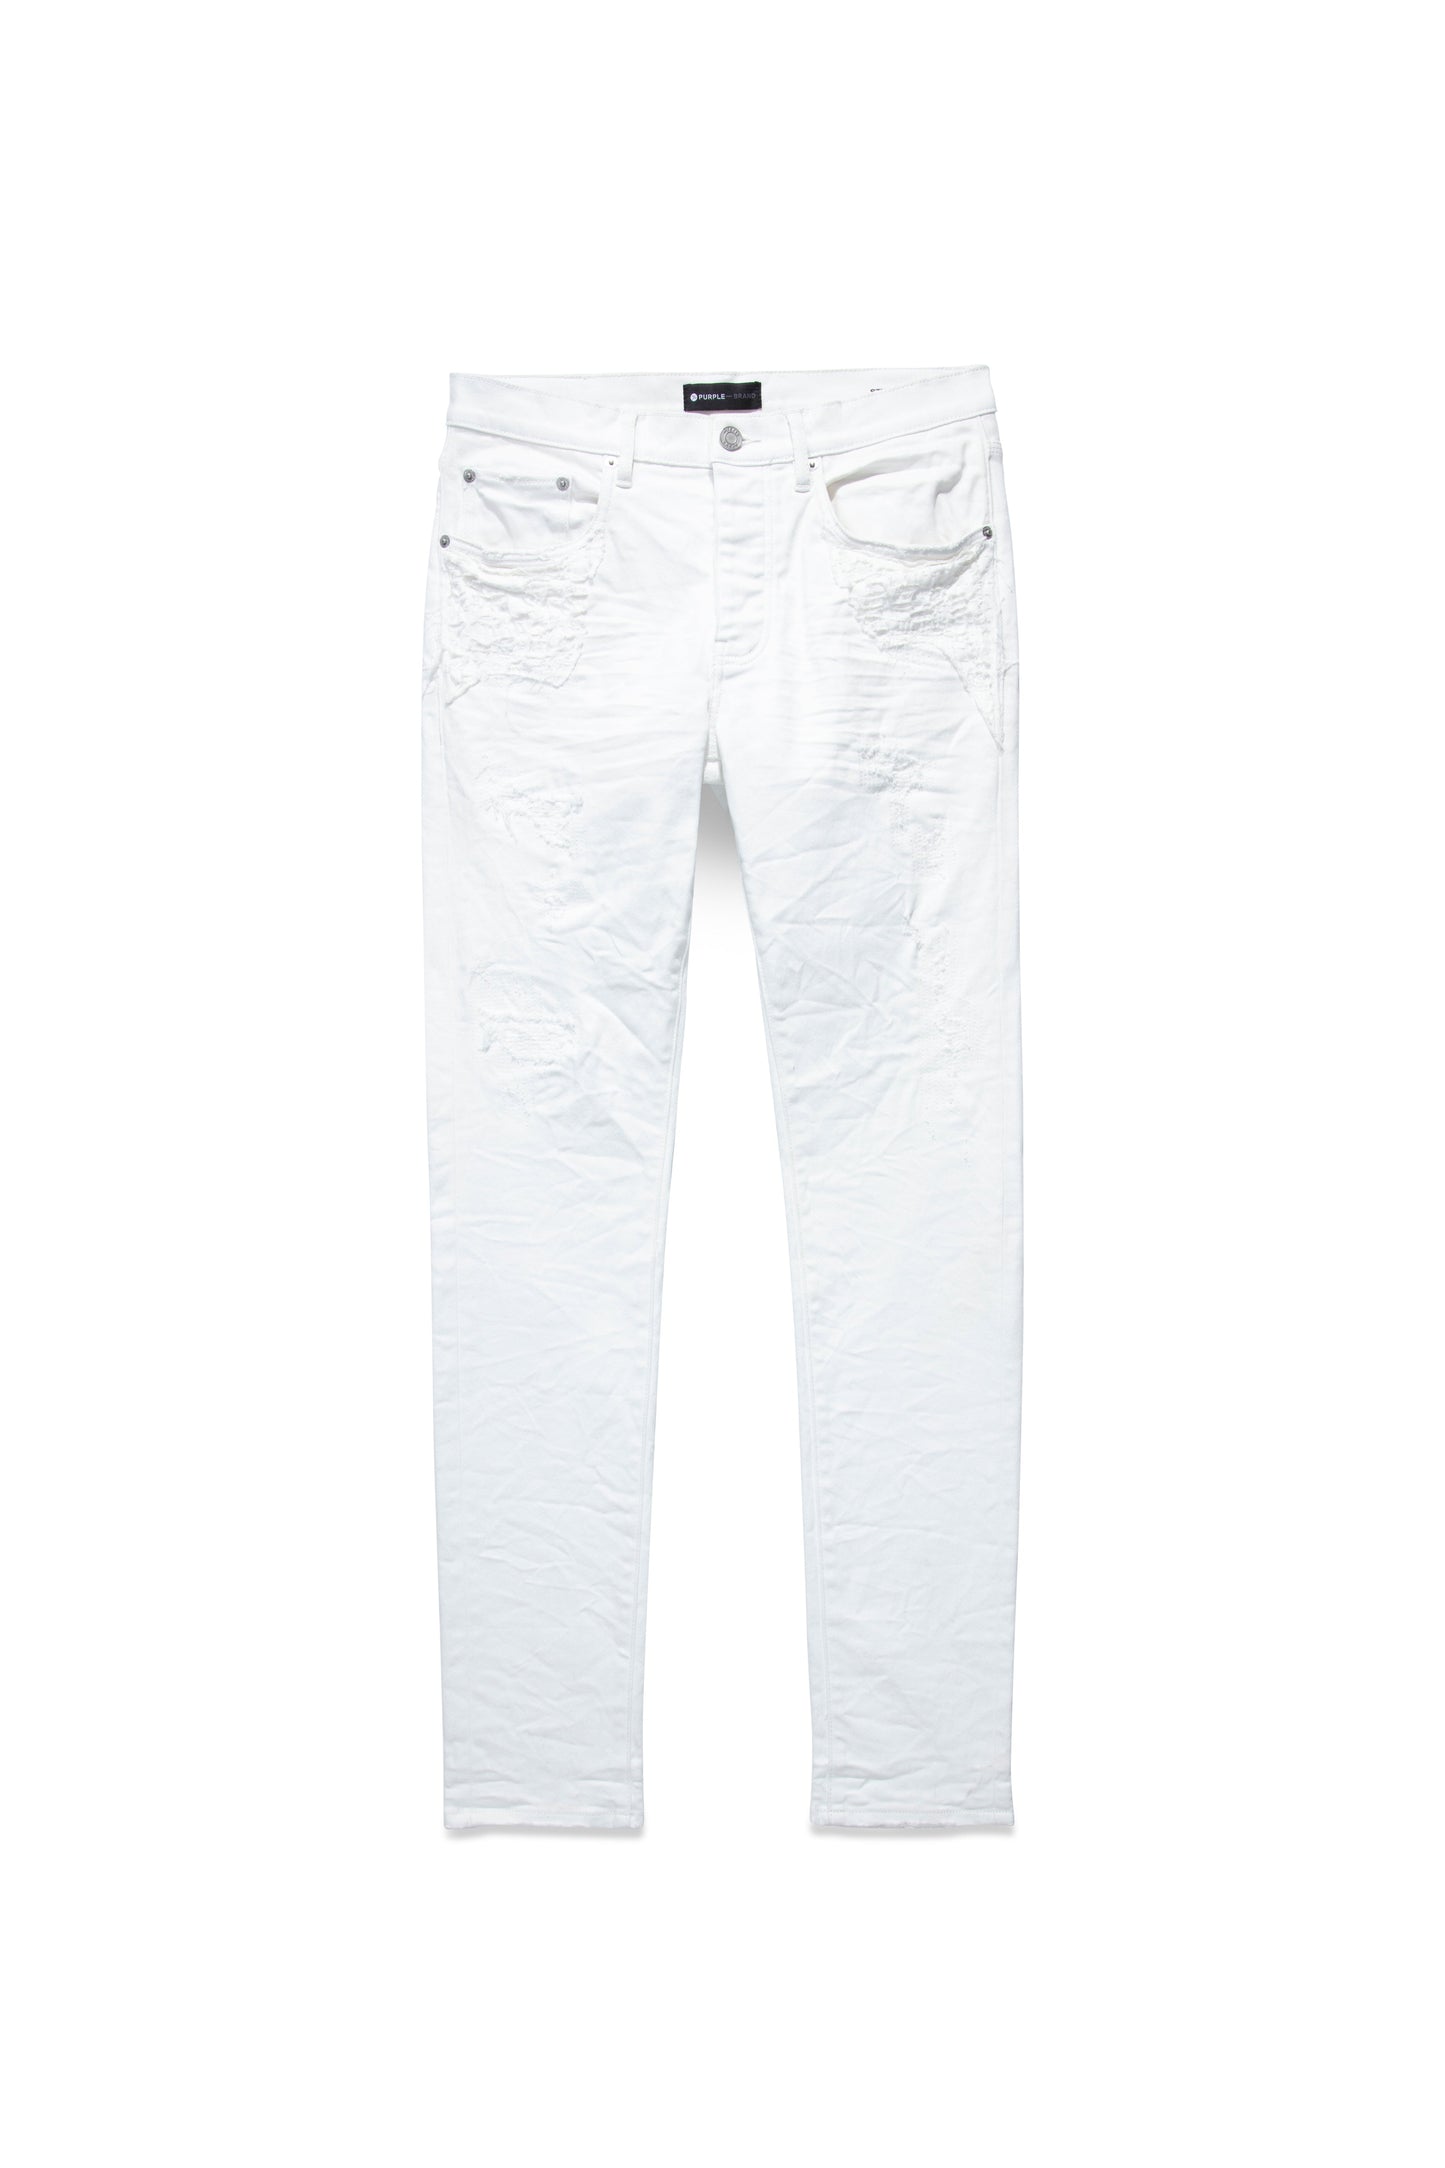 P001 LOW RISE SKINNY JEAN - White Quilted Destroy Pocket